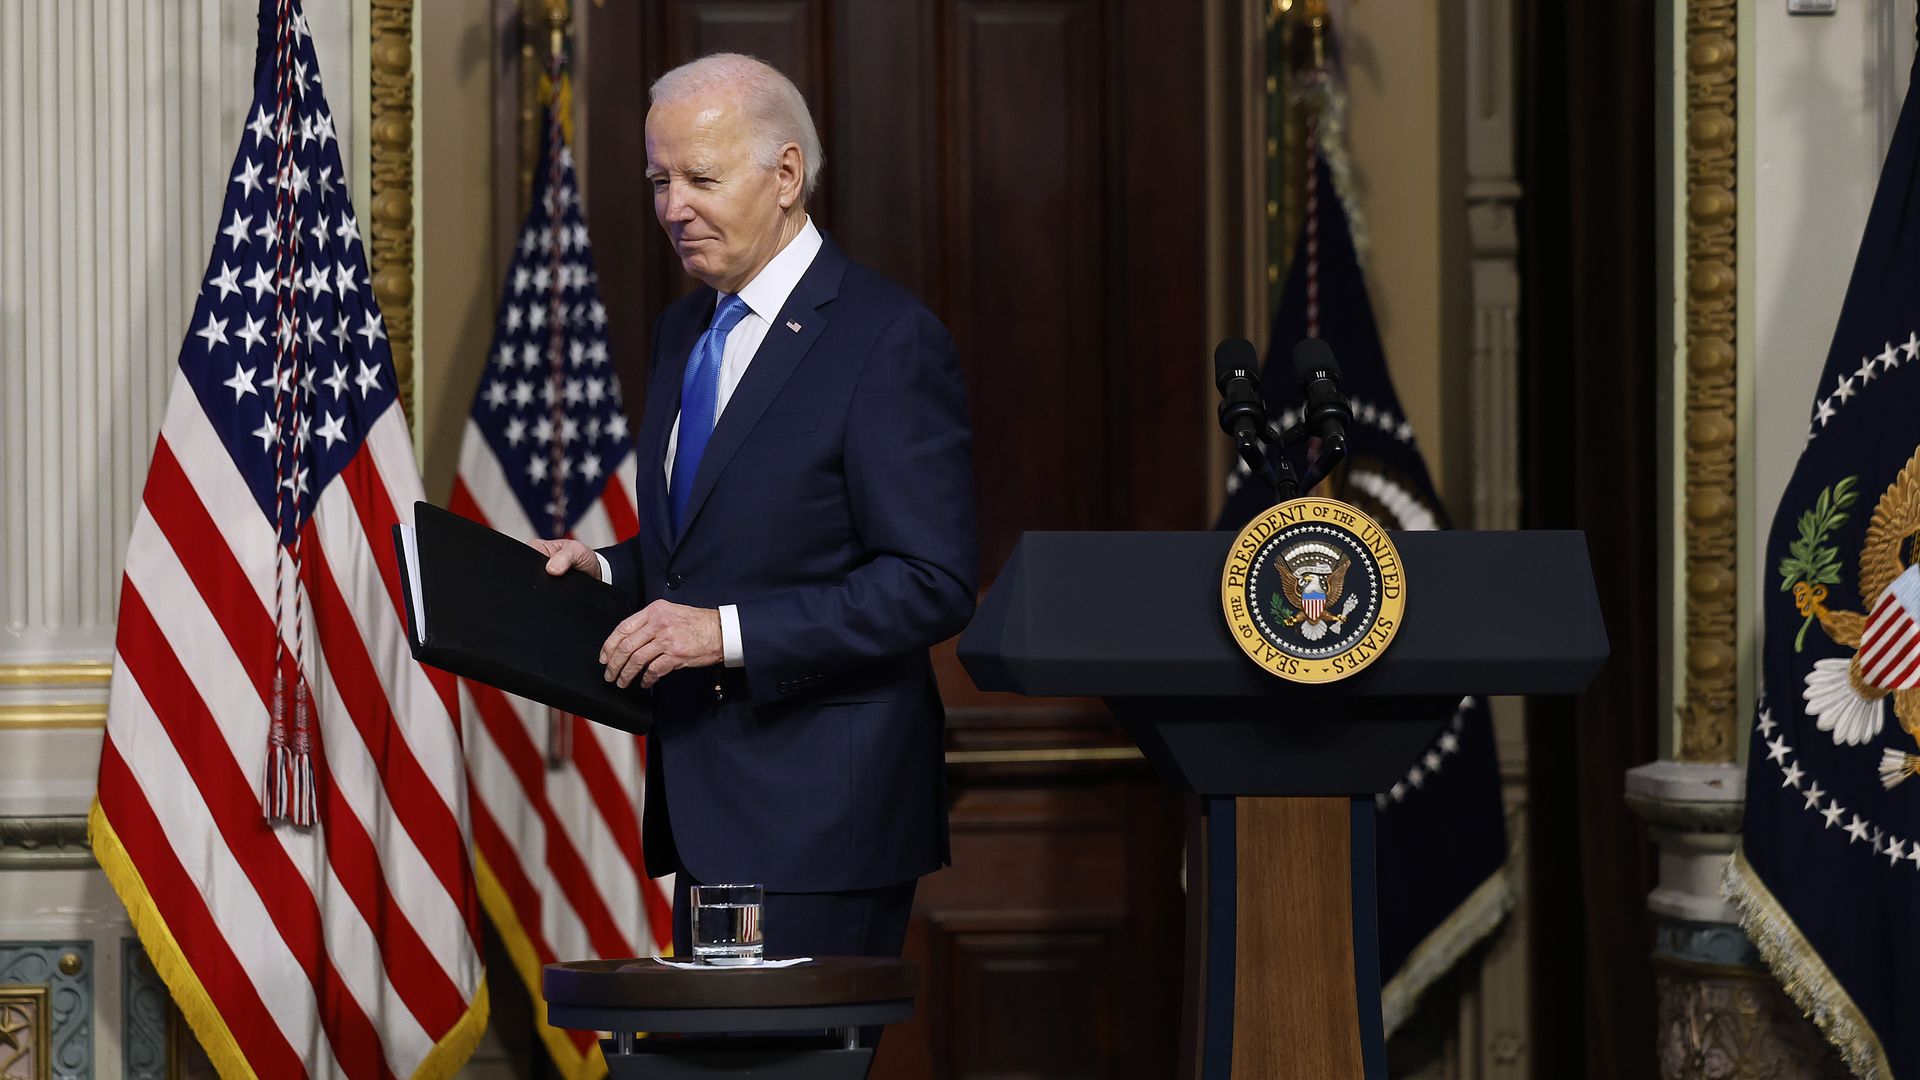 Biden walks behind a lectern with the American flag behind him.